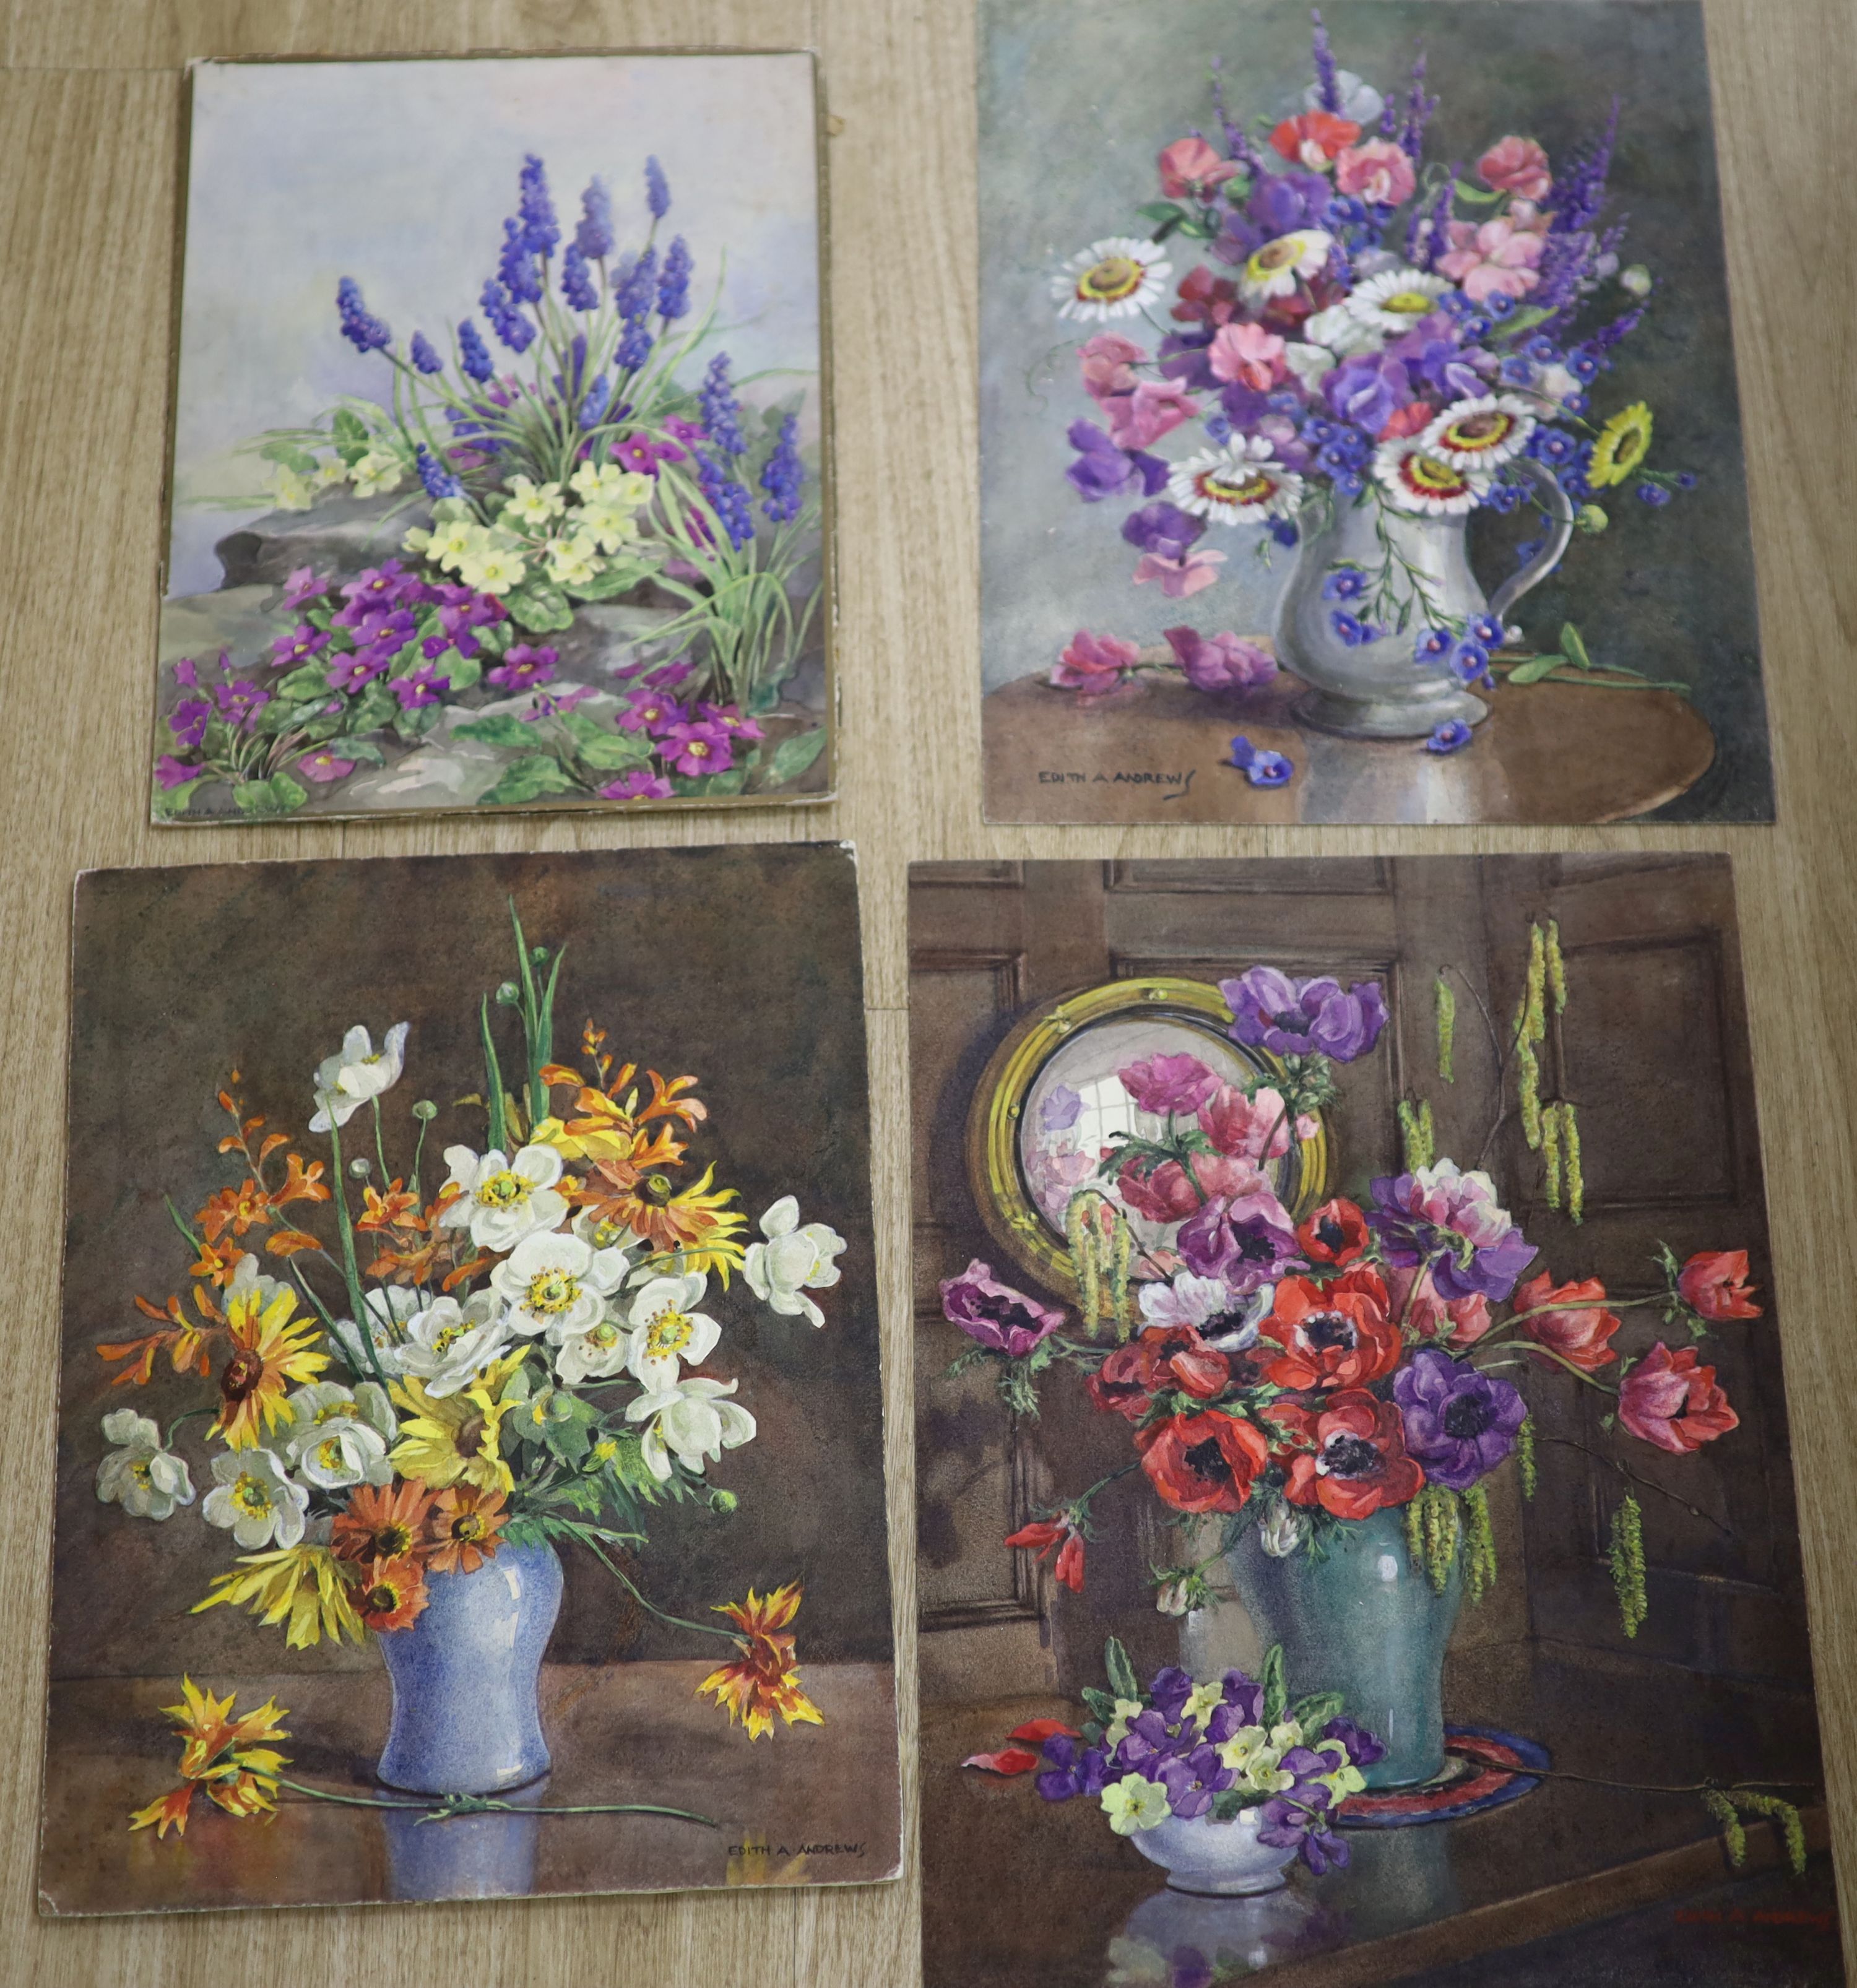 Edith Alice Andrews (1873-1958), 'In the Rock Garden' and three still life watercolours of flowers 44 x 32cm (largest)